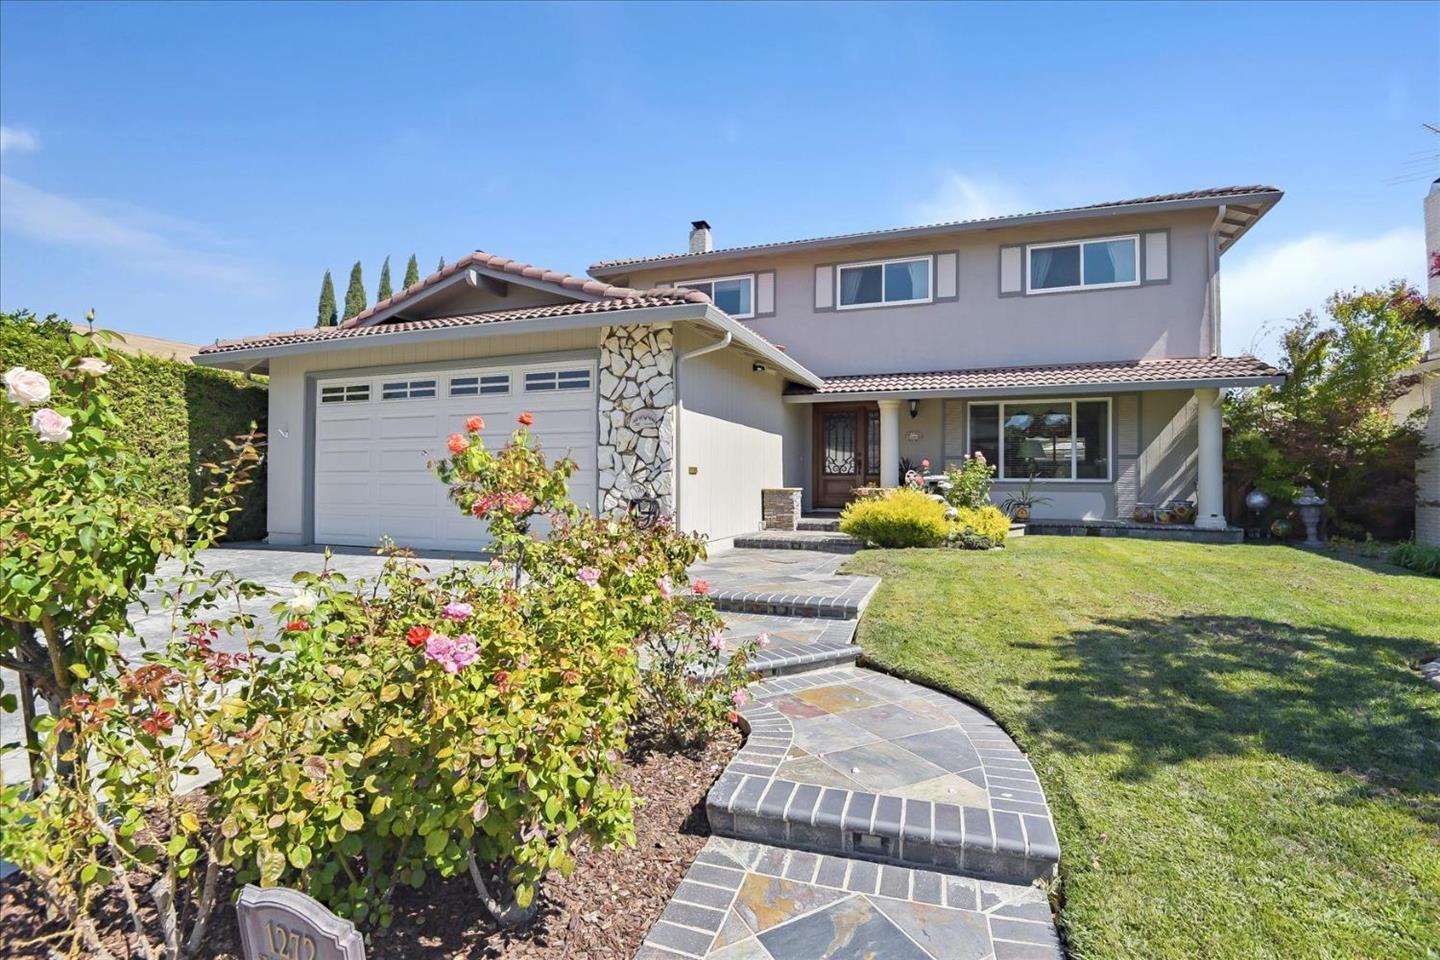 Photo of 1272 Stardust Wy in Milpitas, CA